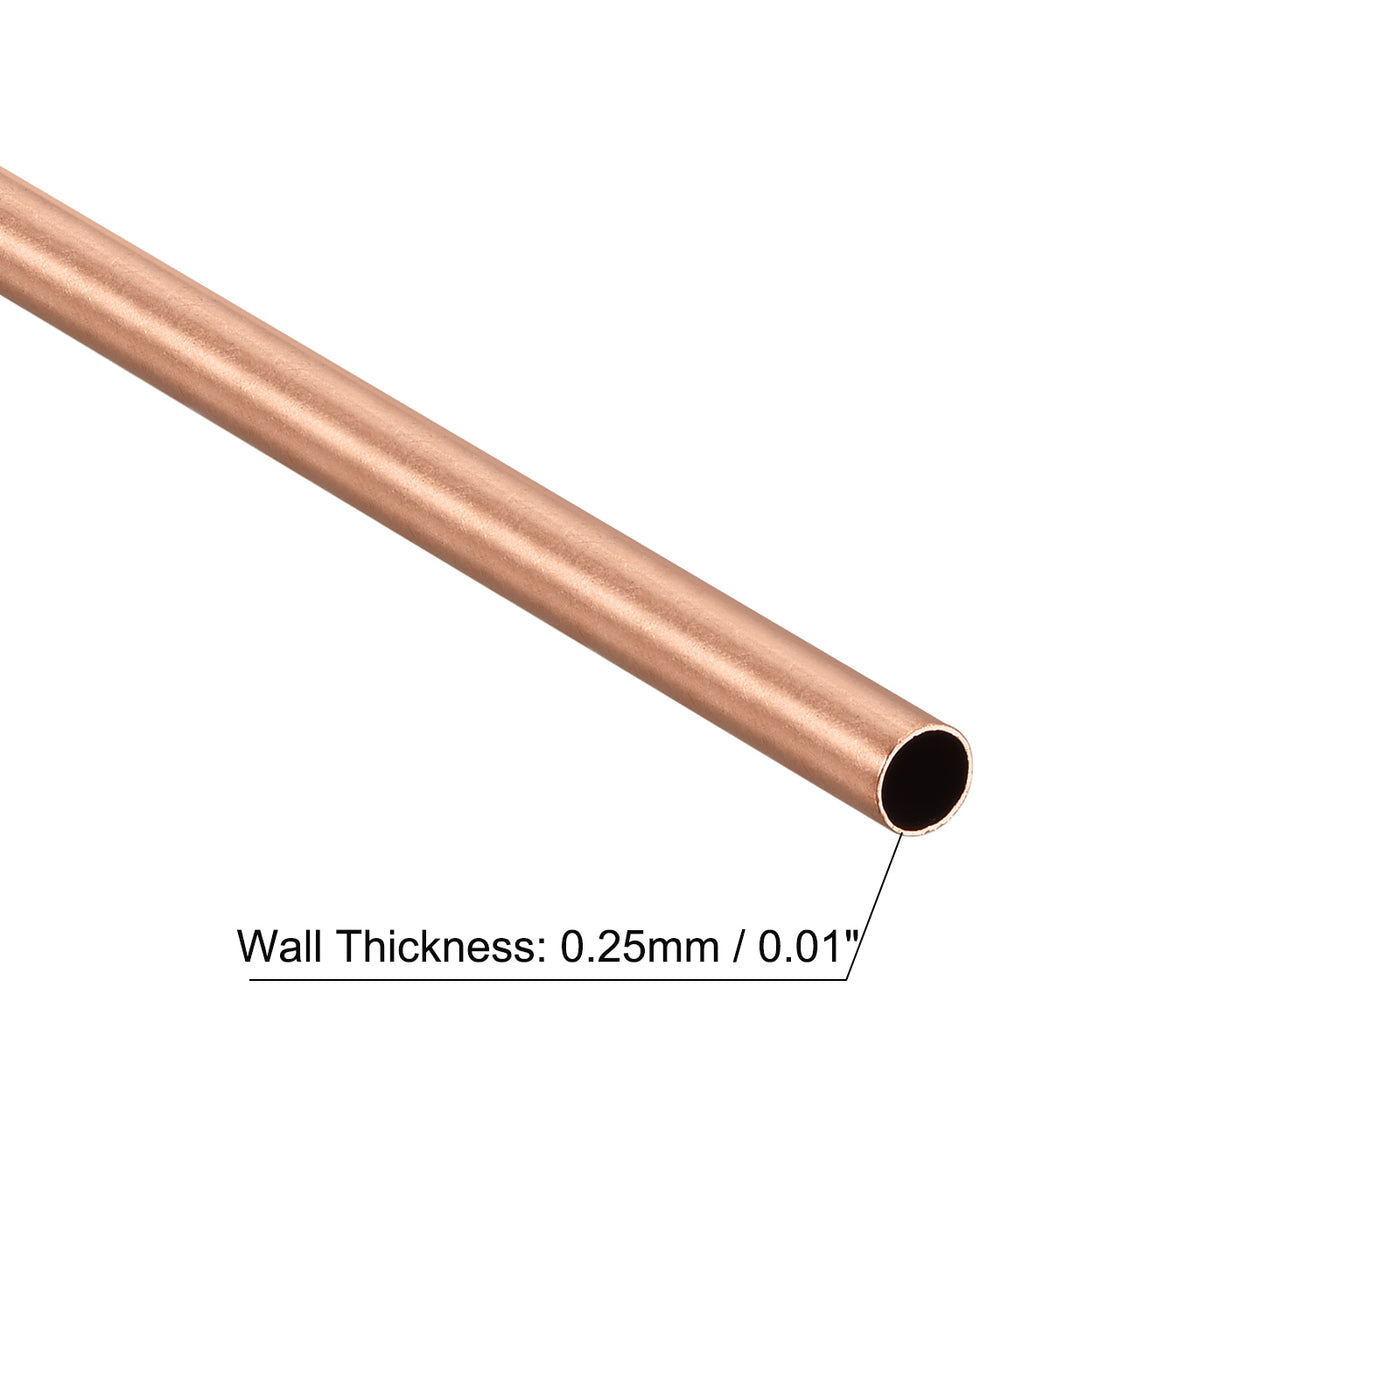 Uxcell Uxcell Copper Round Tube 3.5mm OD 1mm Wall Thickness 300mm Length Pipe Tubing 3 Pcs